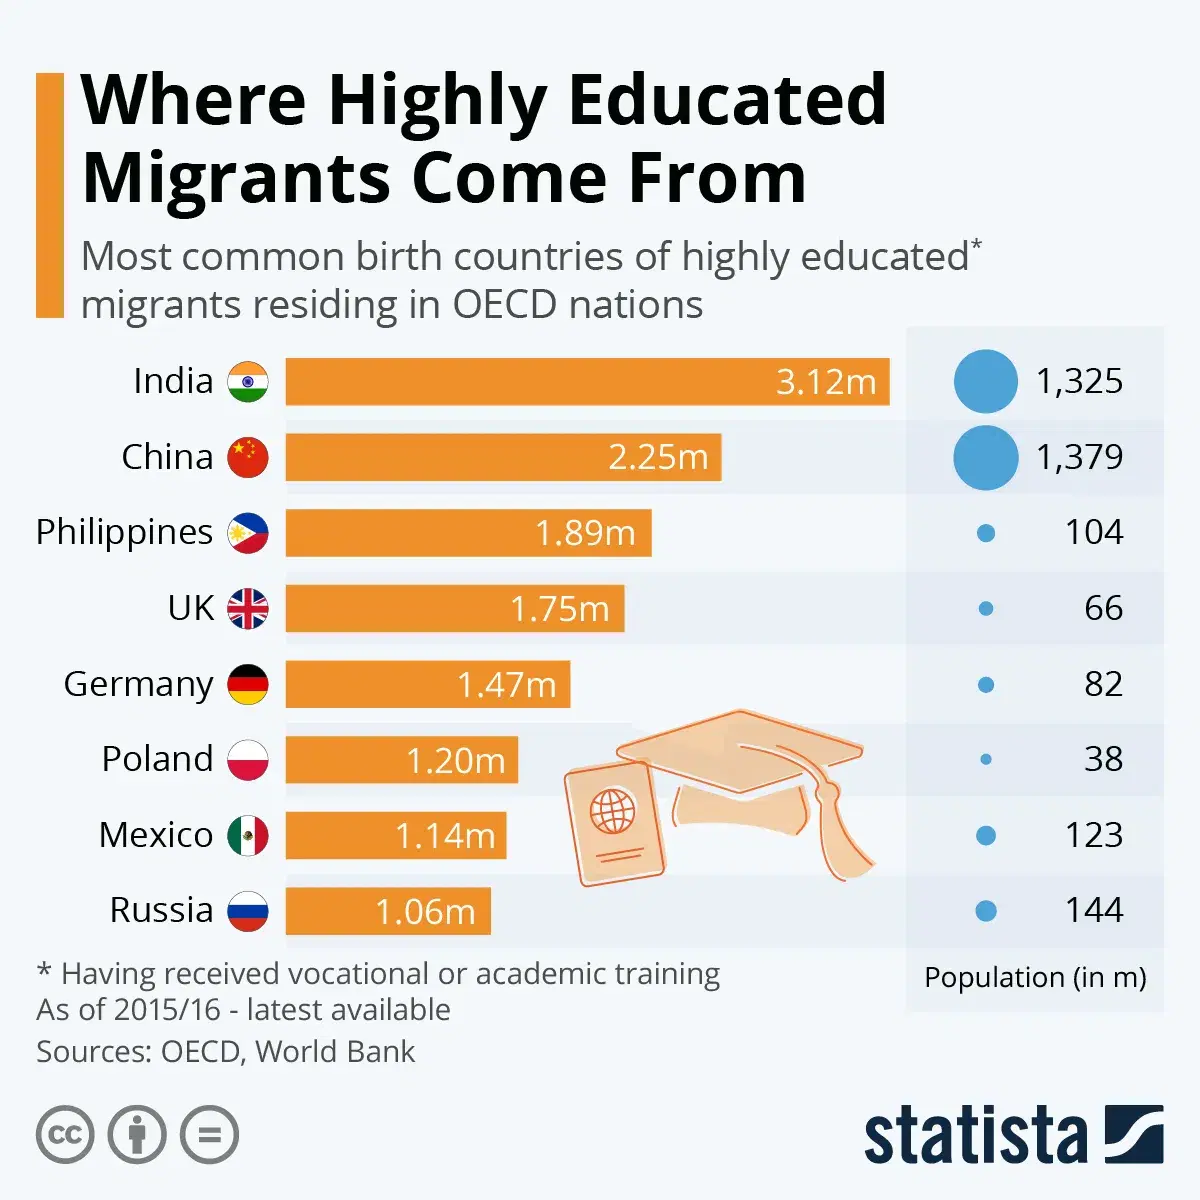 Where Highly Educated Migrants Come From